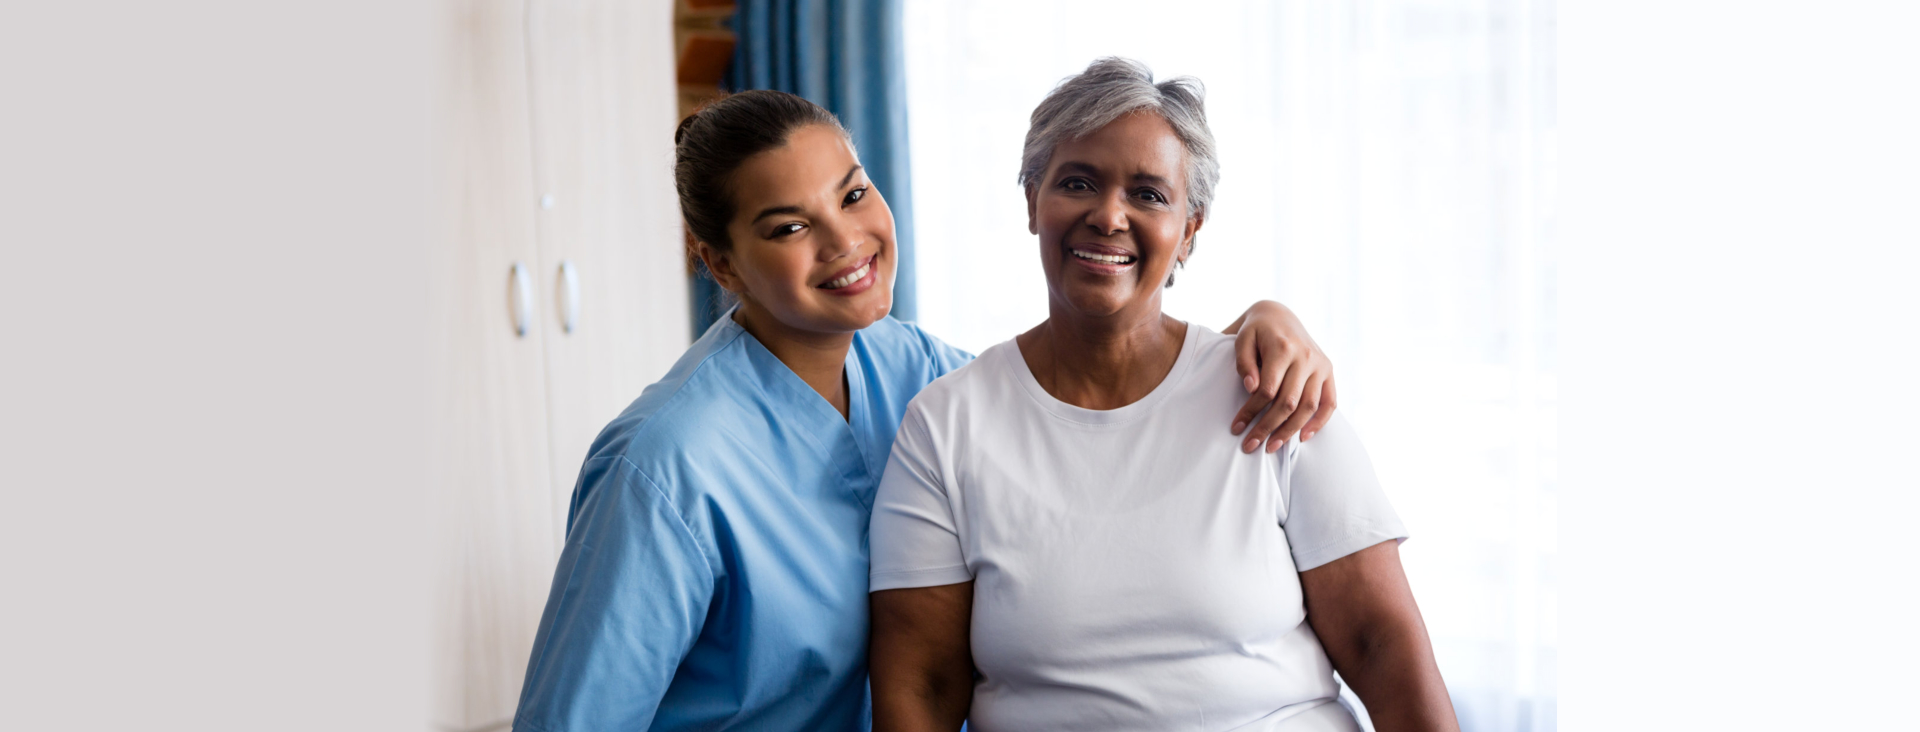 senior woman and nurse facing each other while smiling